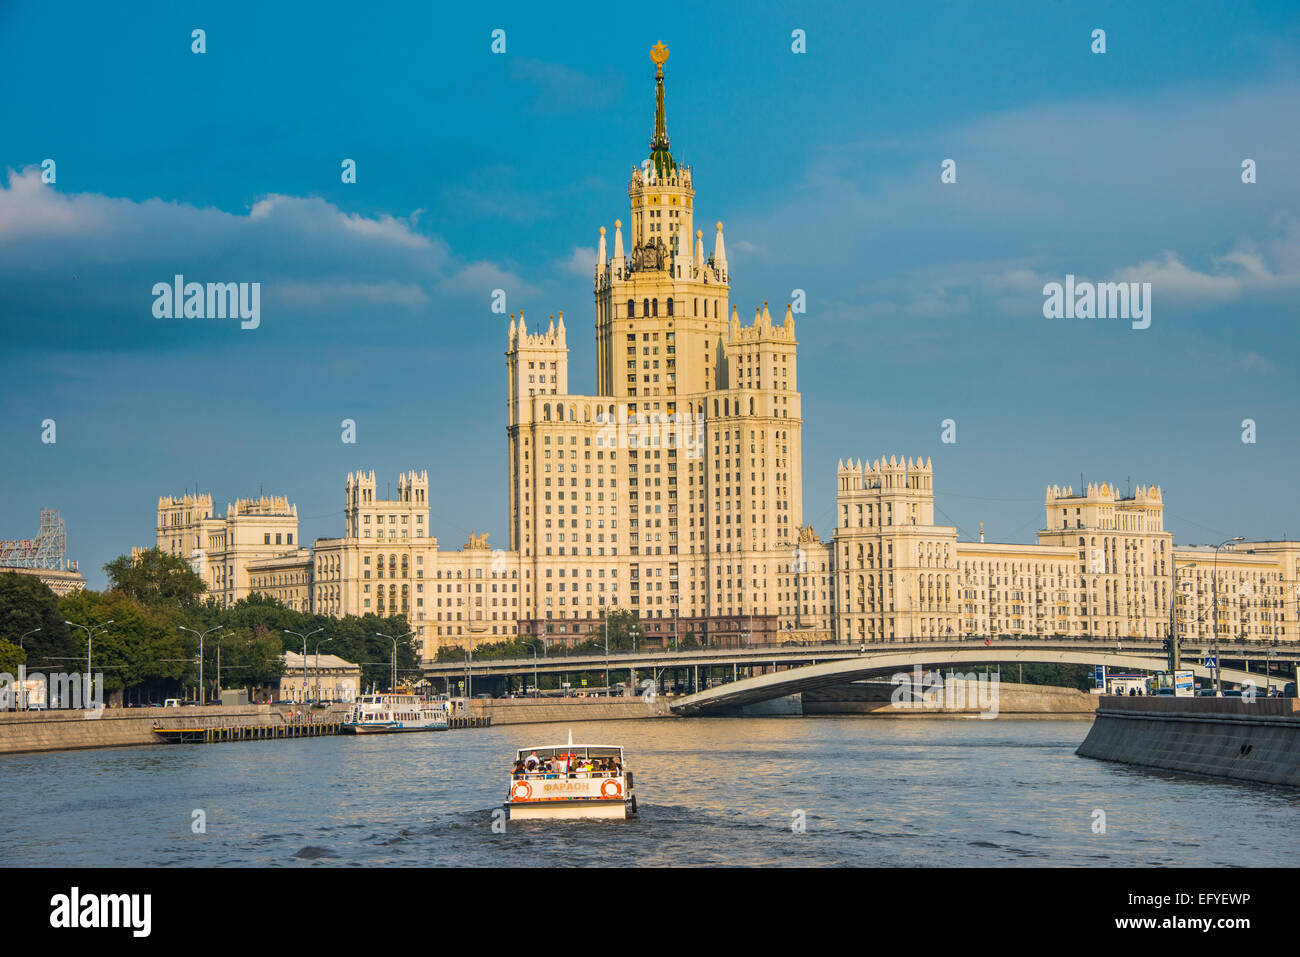 Stalin Tower, Moskva River, Moscow, Russia Stock Photo